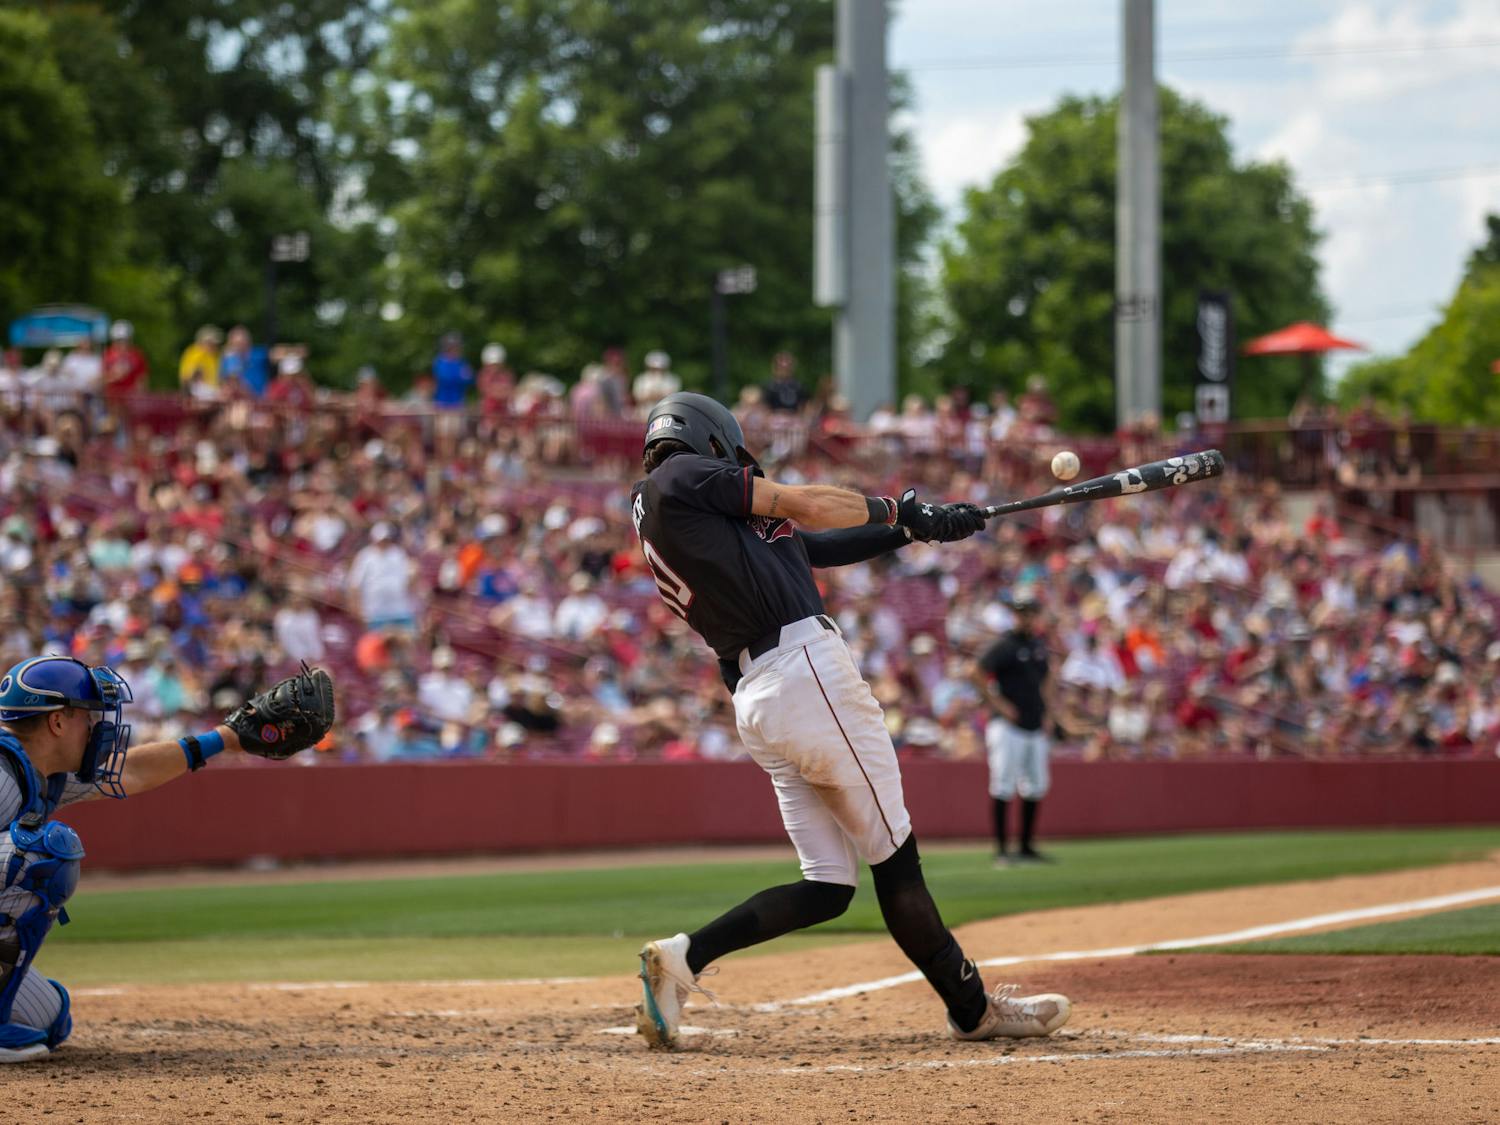 Senior outfielder Dylan Brewer connects with the ball on April 22, 2023, at Founders Park during the third game between South Carolina and Florida. Brewer accounted for three runs and went 4-5 at the plate in the series finale.